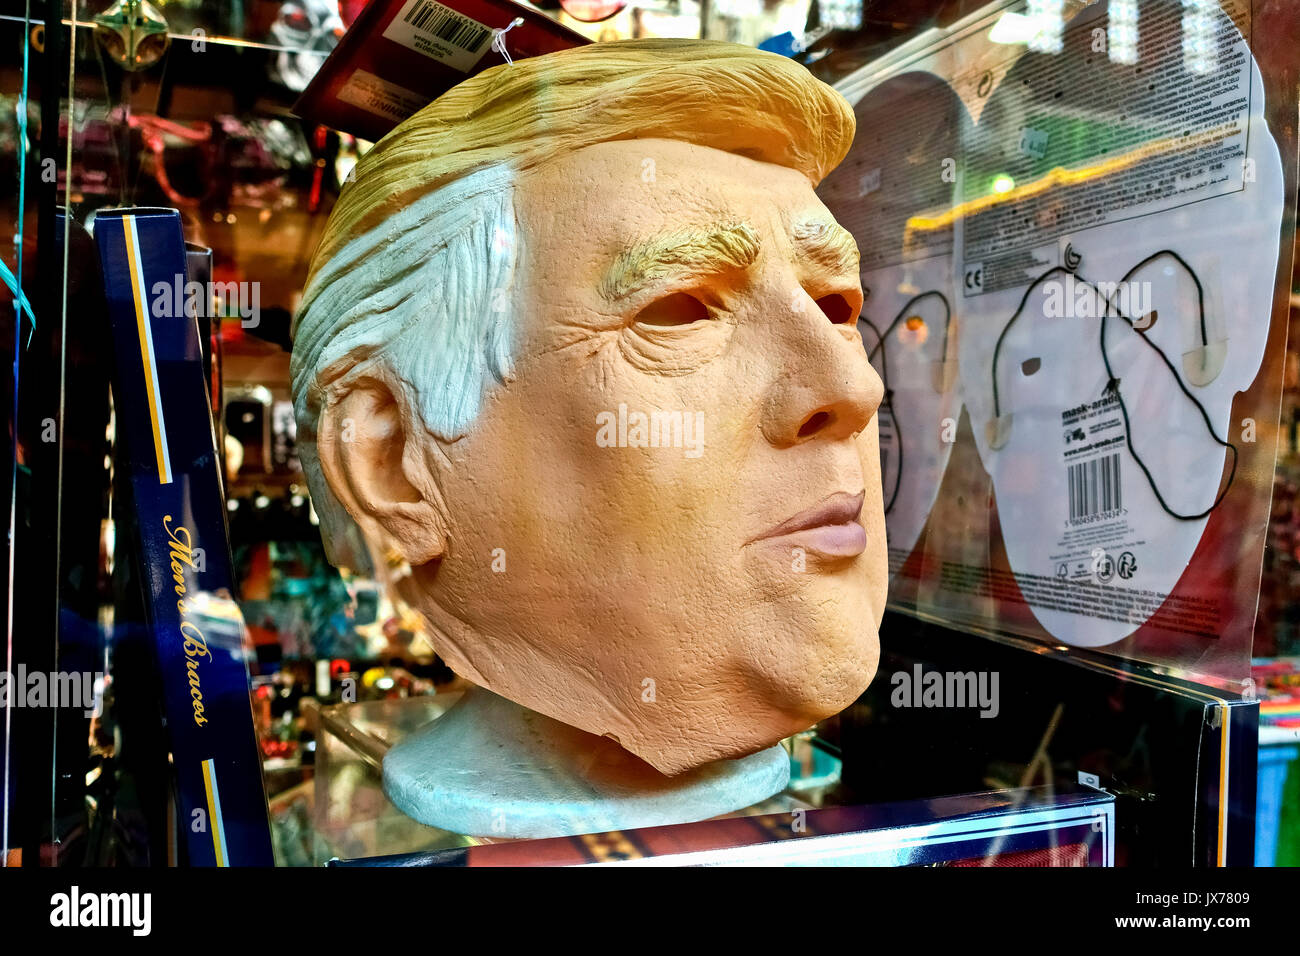 Donald Trump mask on sale in a store. Close up Stock Photo